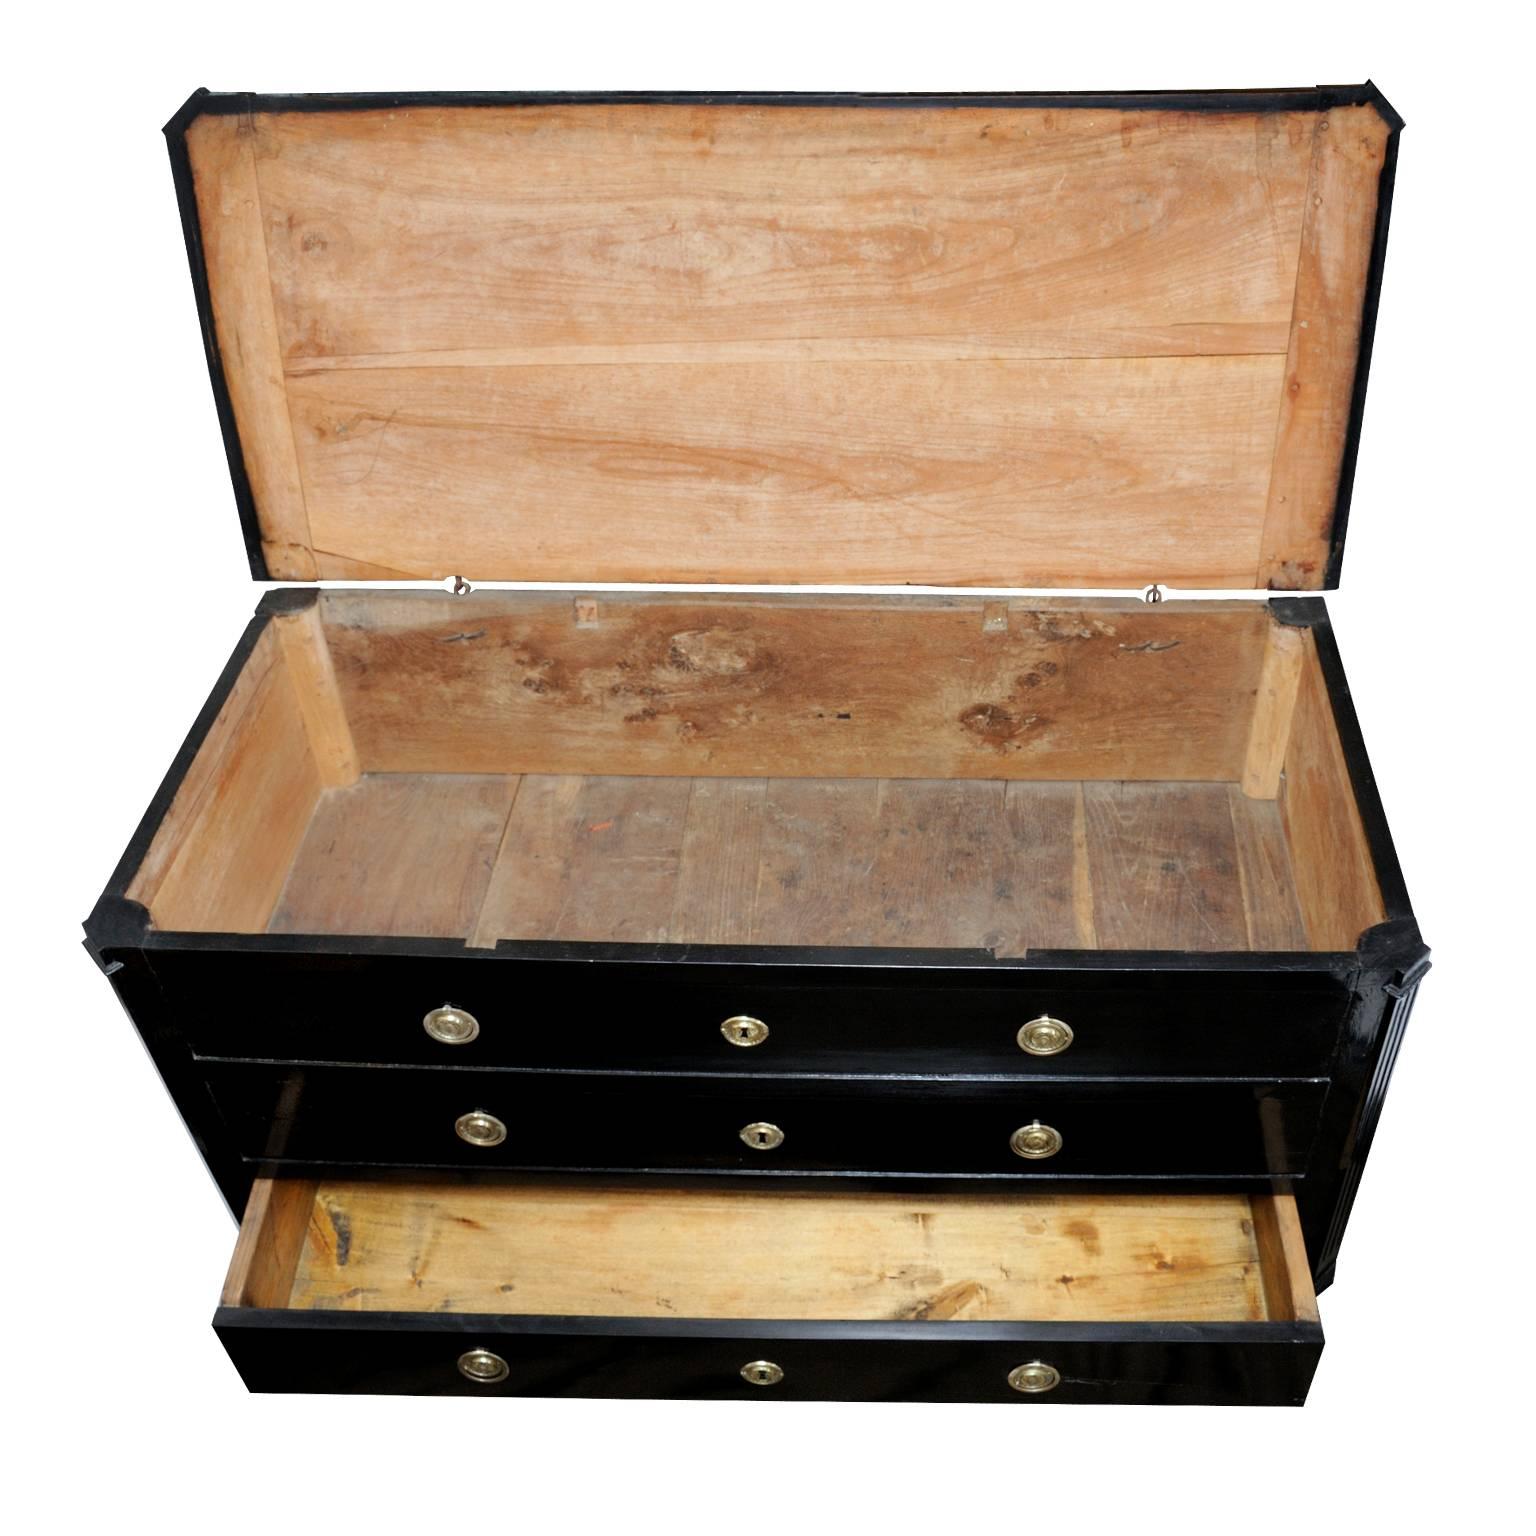 This is a wonderfully proportioned late 18th century French Louis XVI cherrywood ebonized neoclassical coffer/blanket box with lift up lid for storage.

This coffer features two dummy drawers to the front and a working drawer to the bottom and is